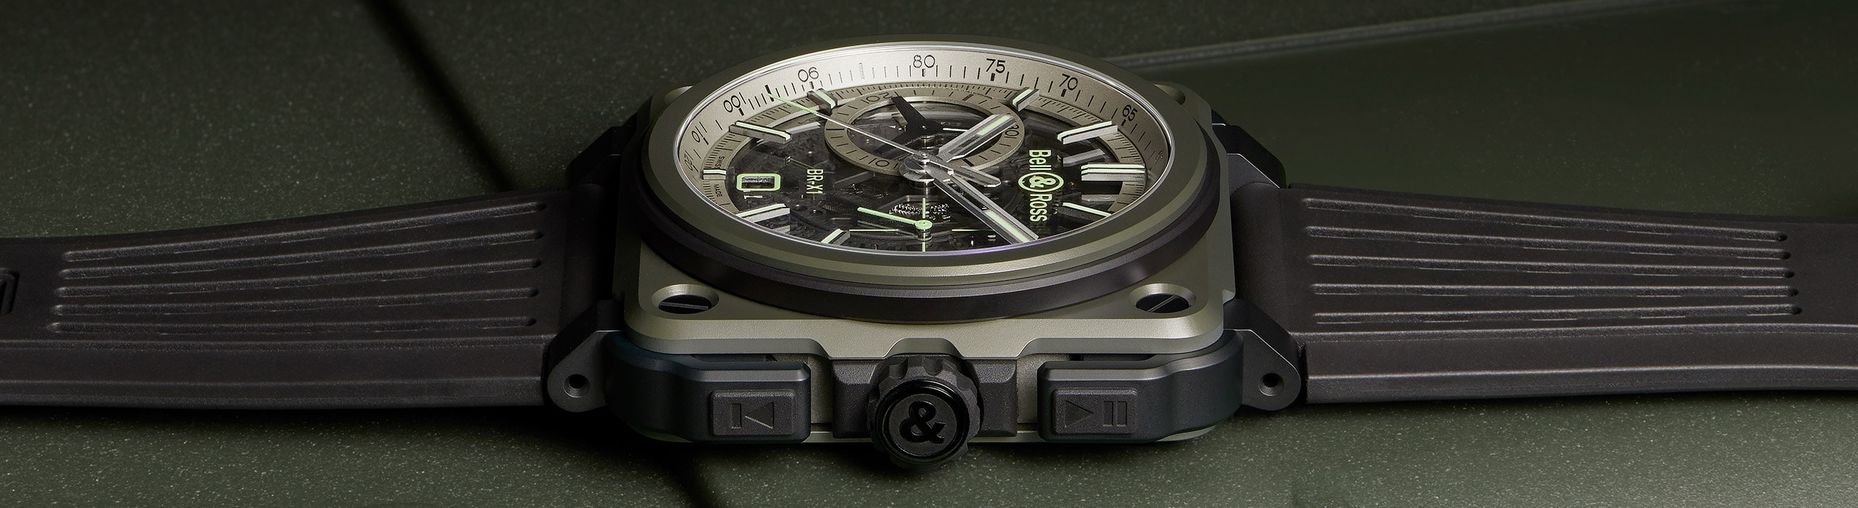 BRX1-CE-TI-MIL Bell & Ross BR-X1